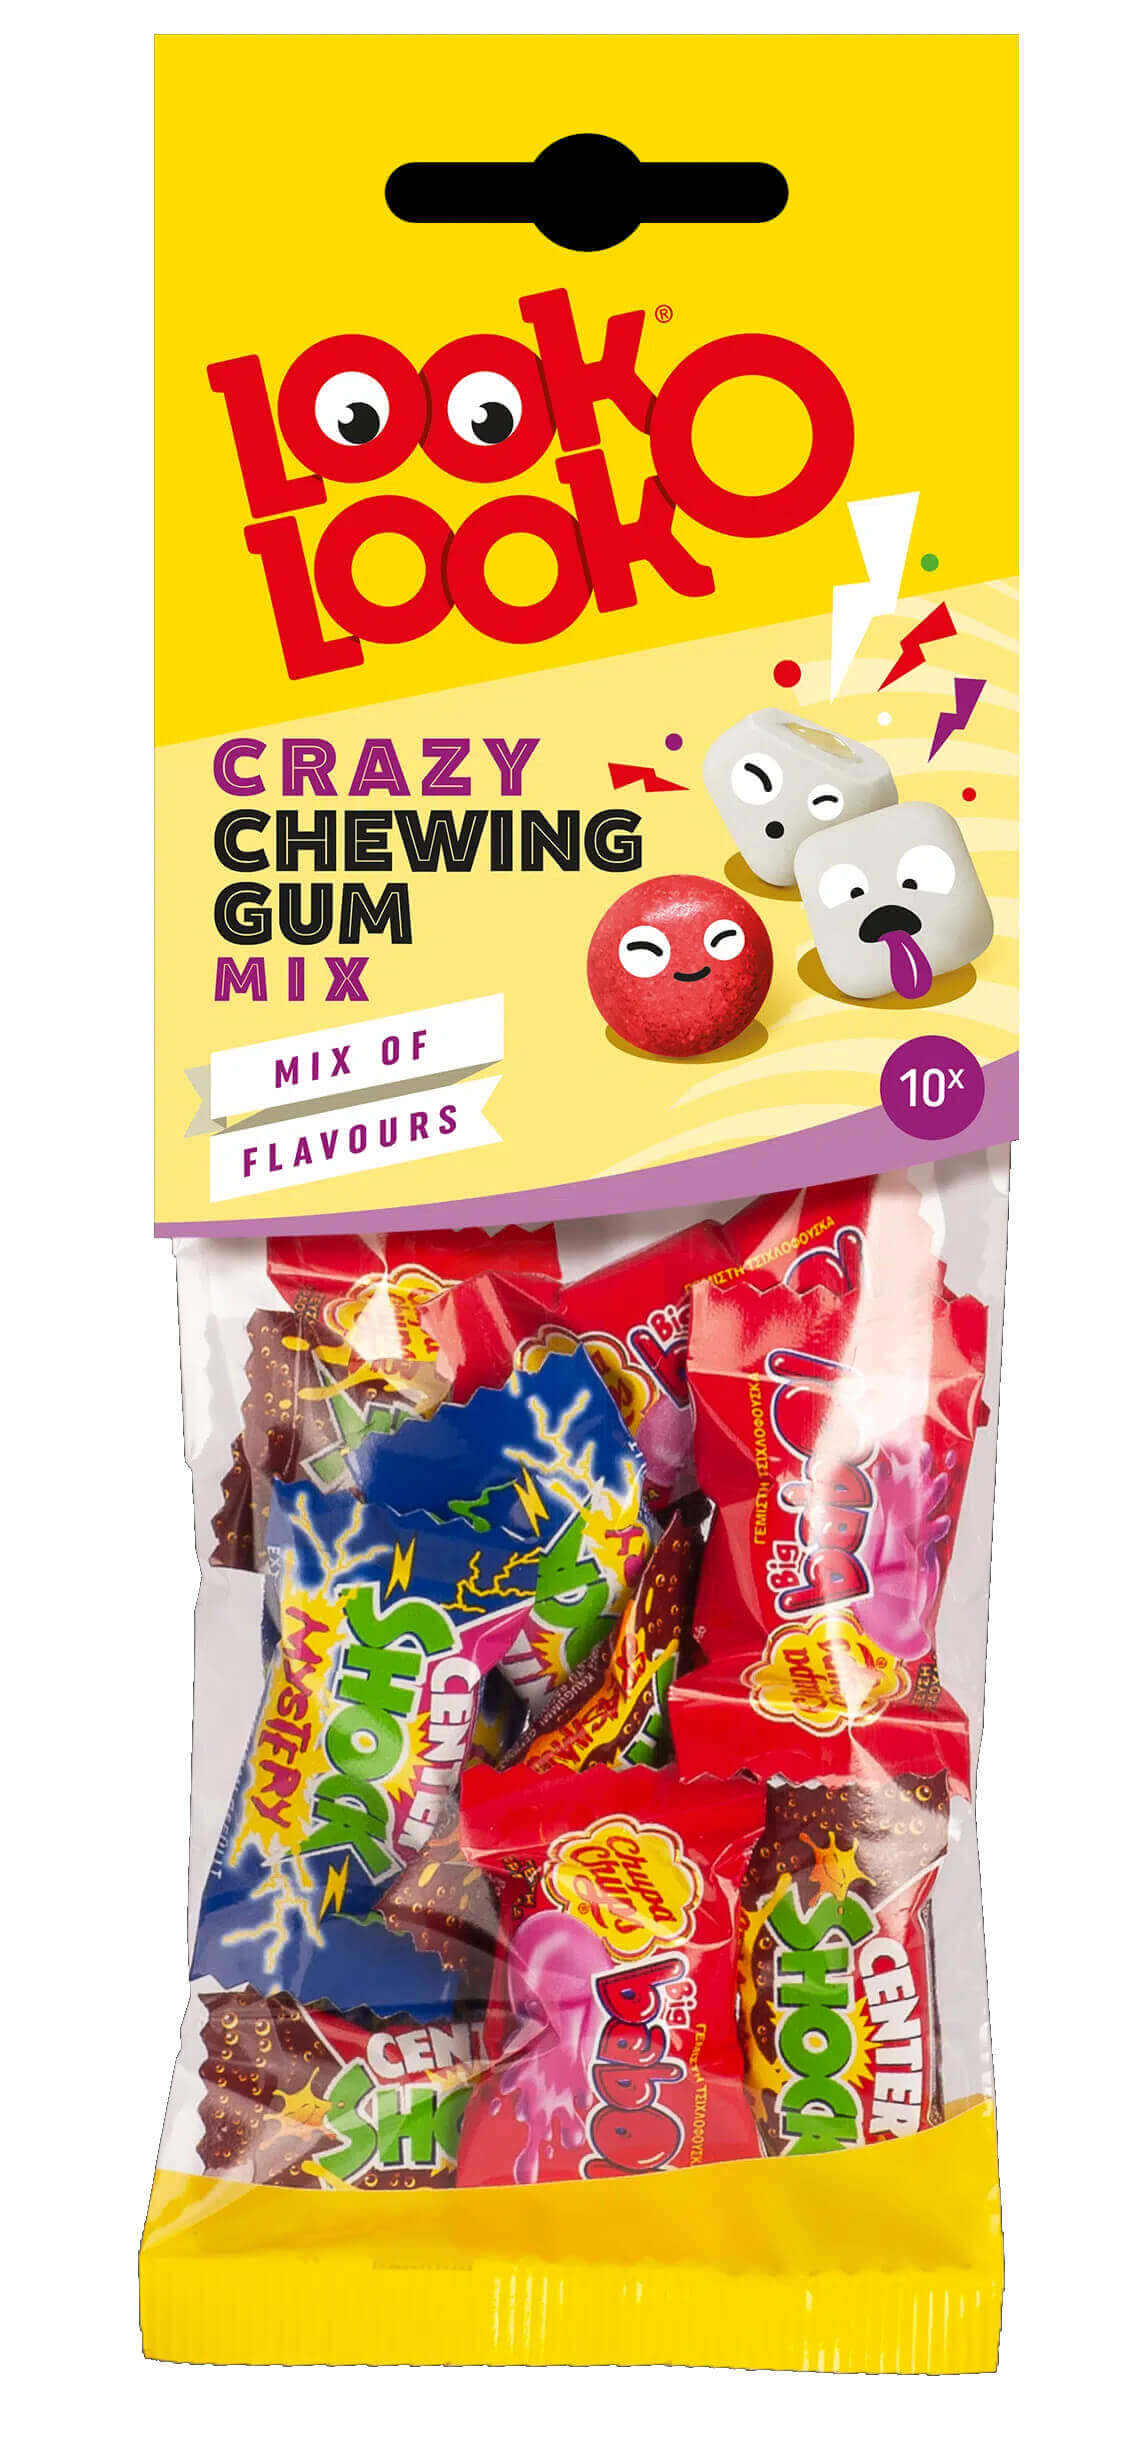 Look-O-Look Crazy Chewing Gum 45g